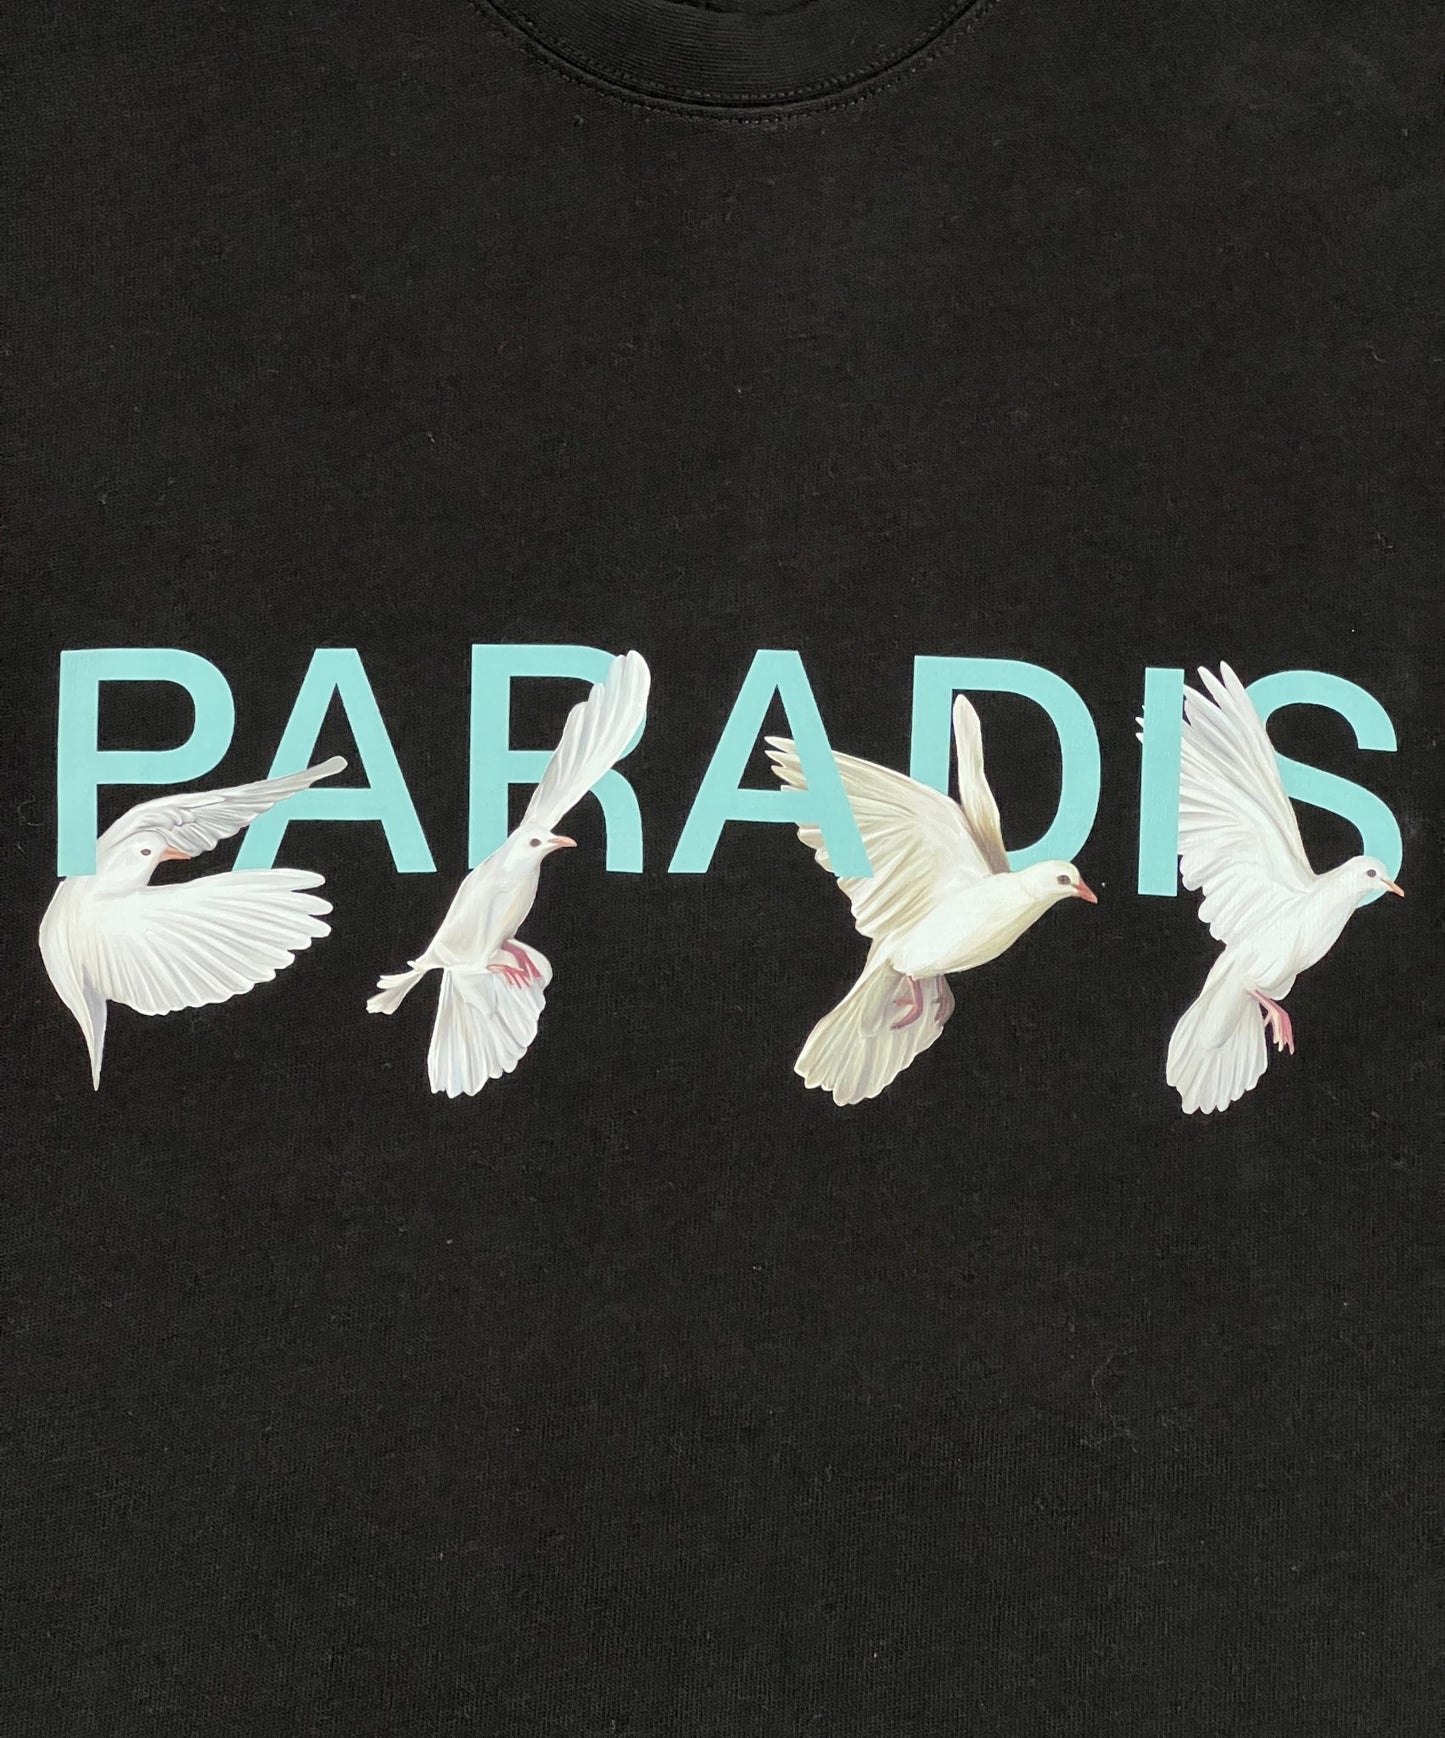 A 3.PARADIS black t-shirt with the word "Paradis" on it.